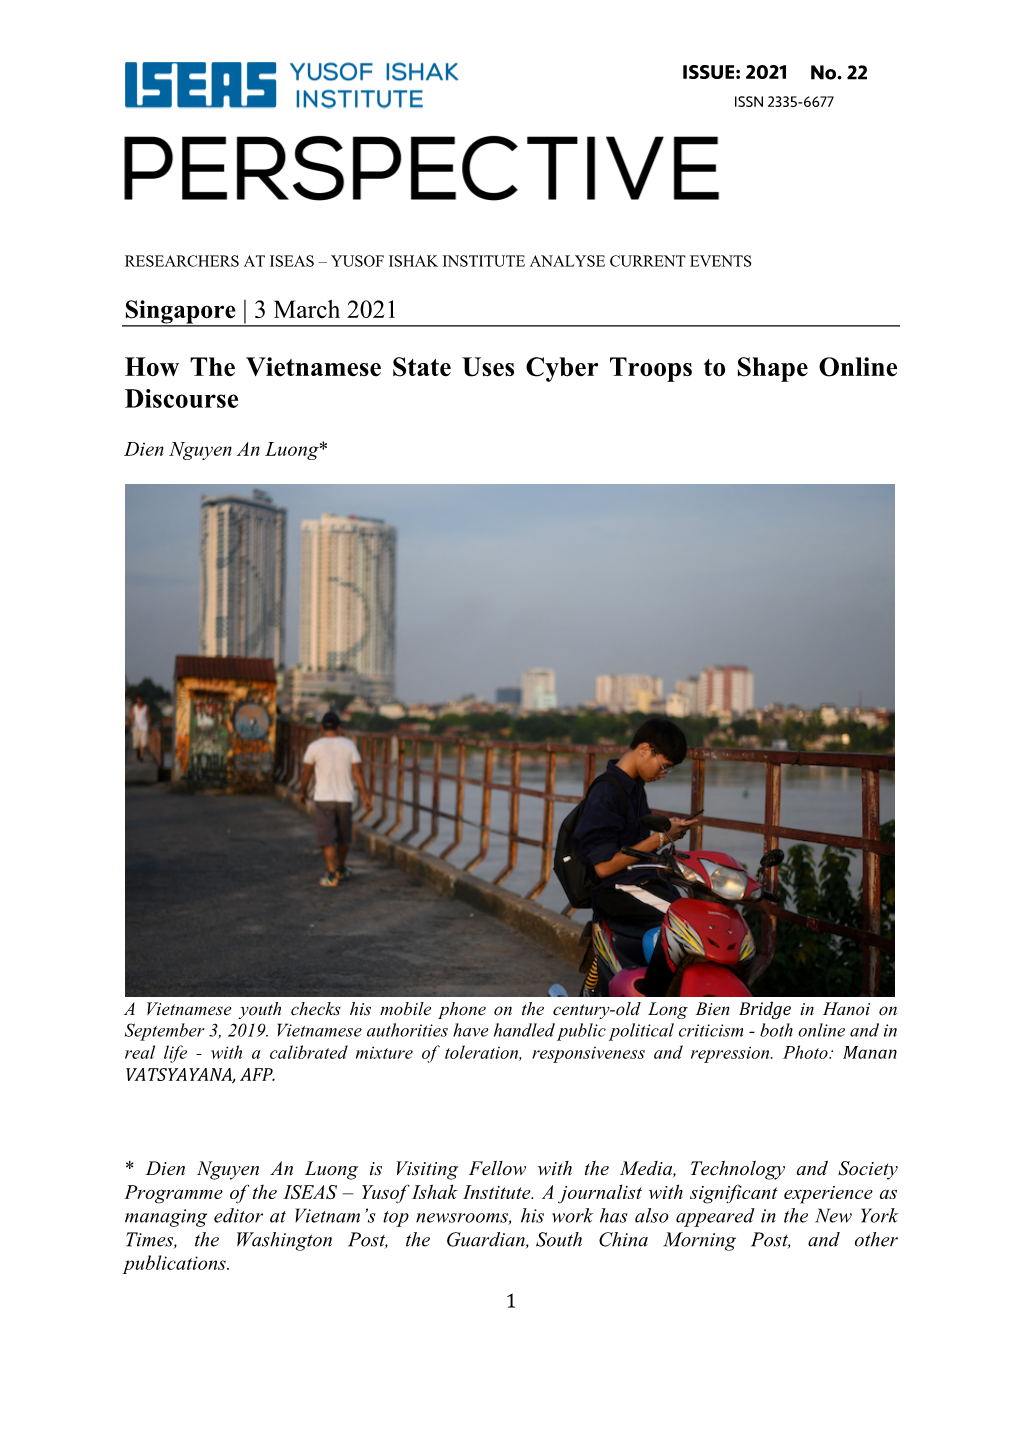 How the Vietnamese State Uses Cyber Troops to Shape Online Discourse